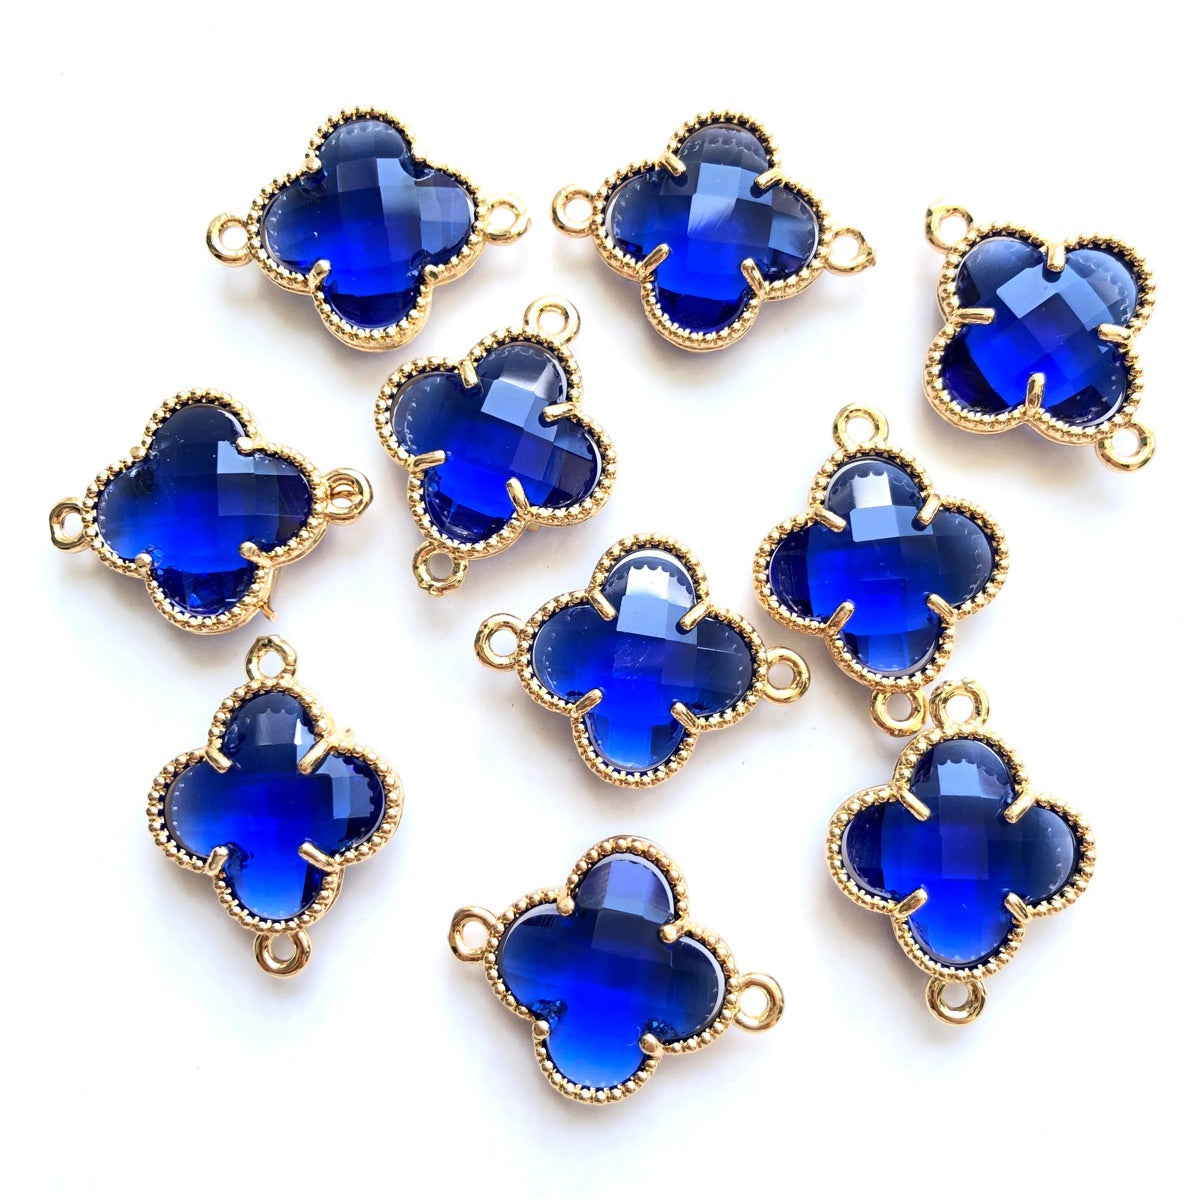 10pcs/Lot Gold Plated Glass Crystal Clover Flower Connectors Blue Stone Charms Flower Glass Beads New Charms Arrivals Charms Beads Beyond